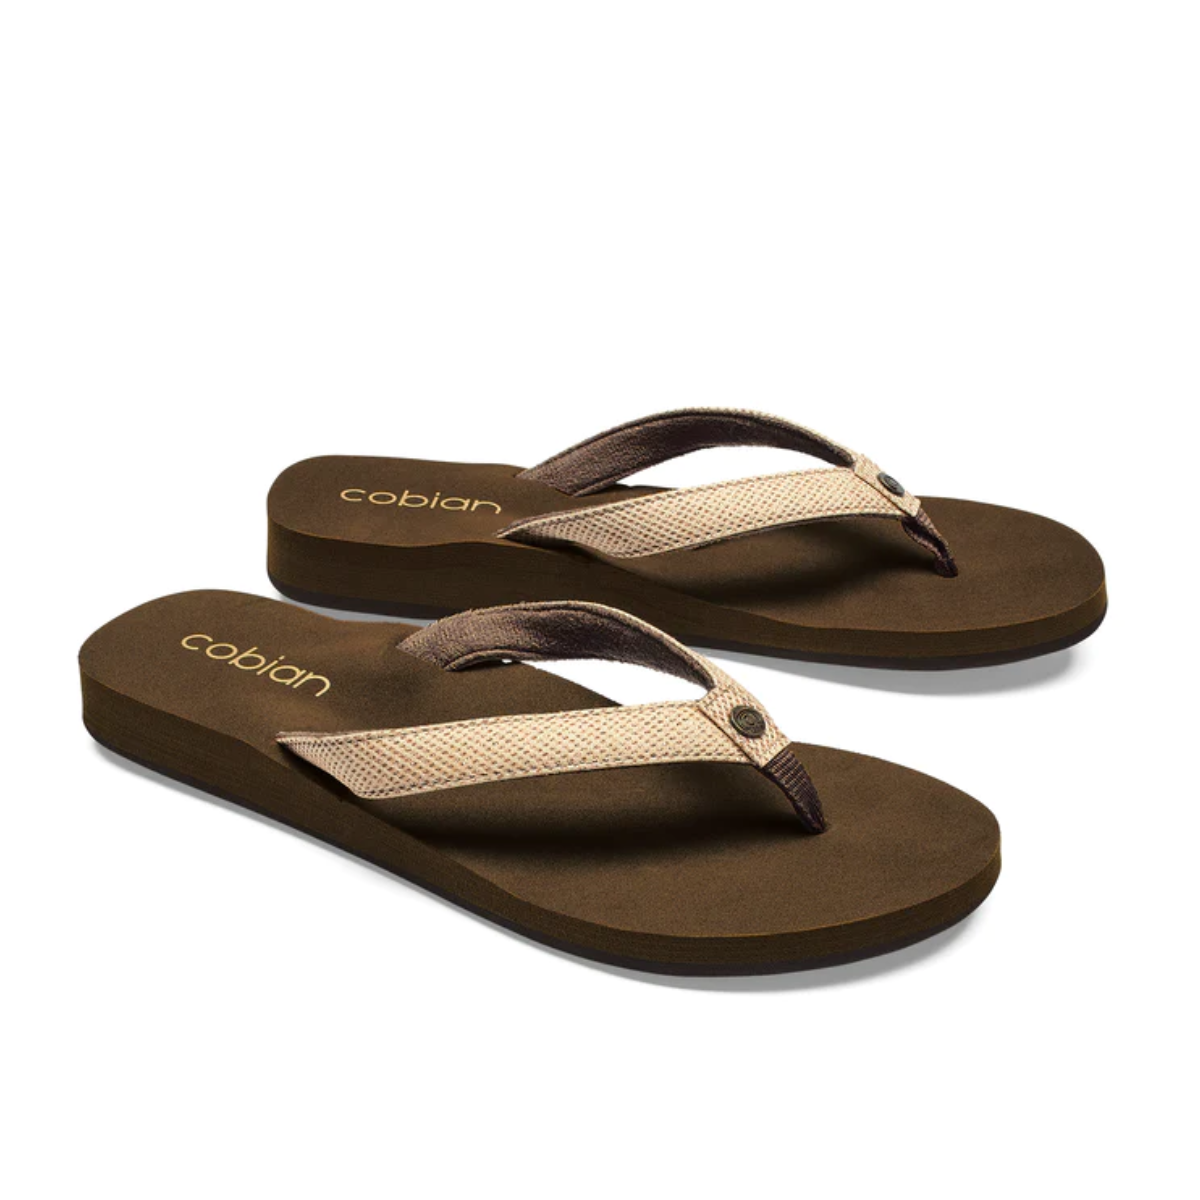 These women's flip flops, Fiesta Skinny Bounce by Cobian in Tan and featuring a classic design, offer both style and comfort with COBIAN Skinny Bounce cushioning.